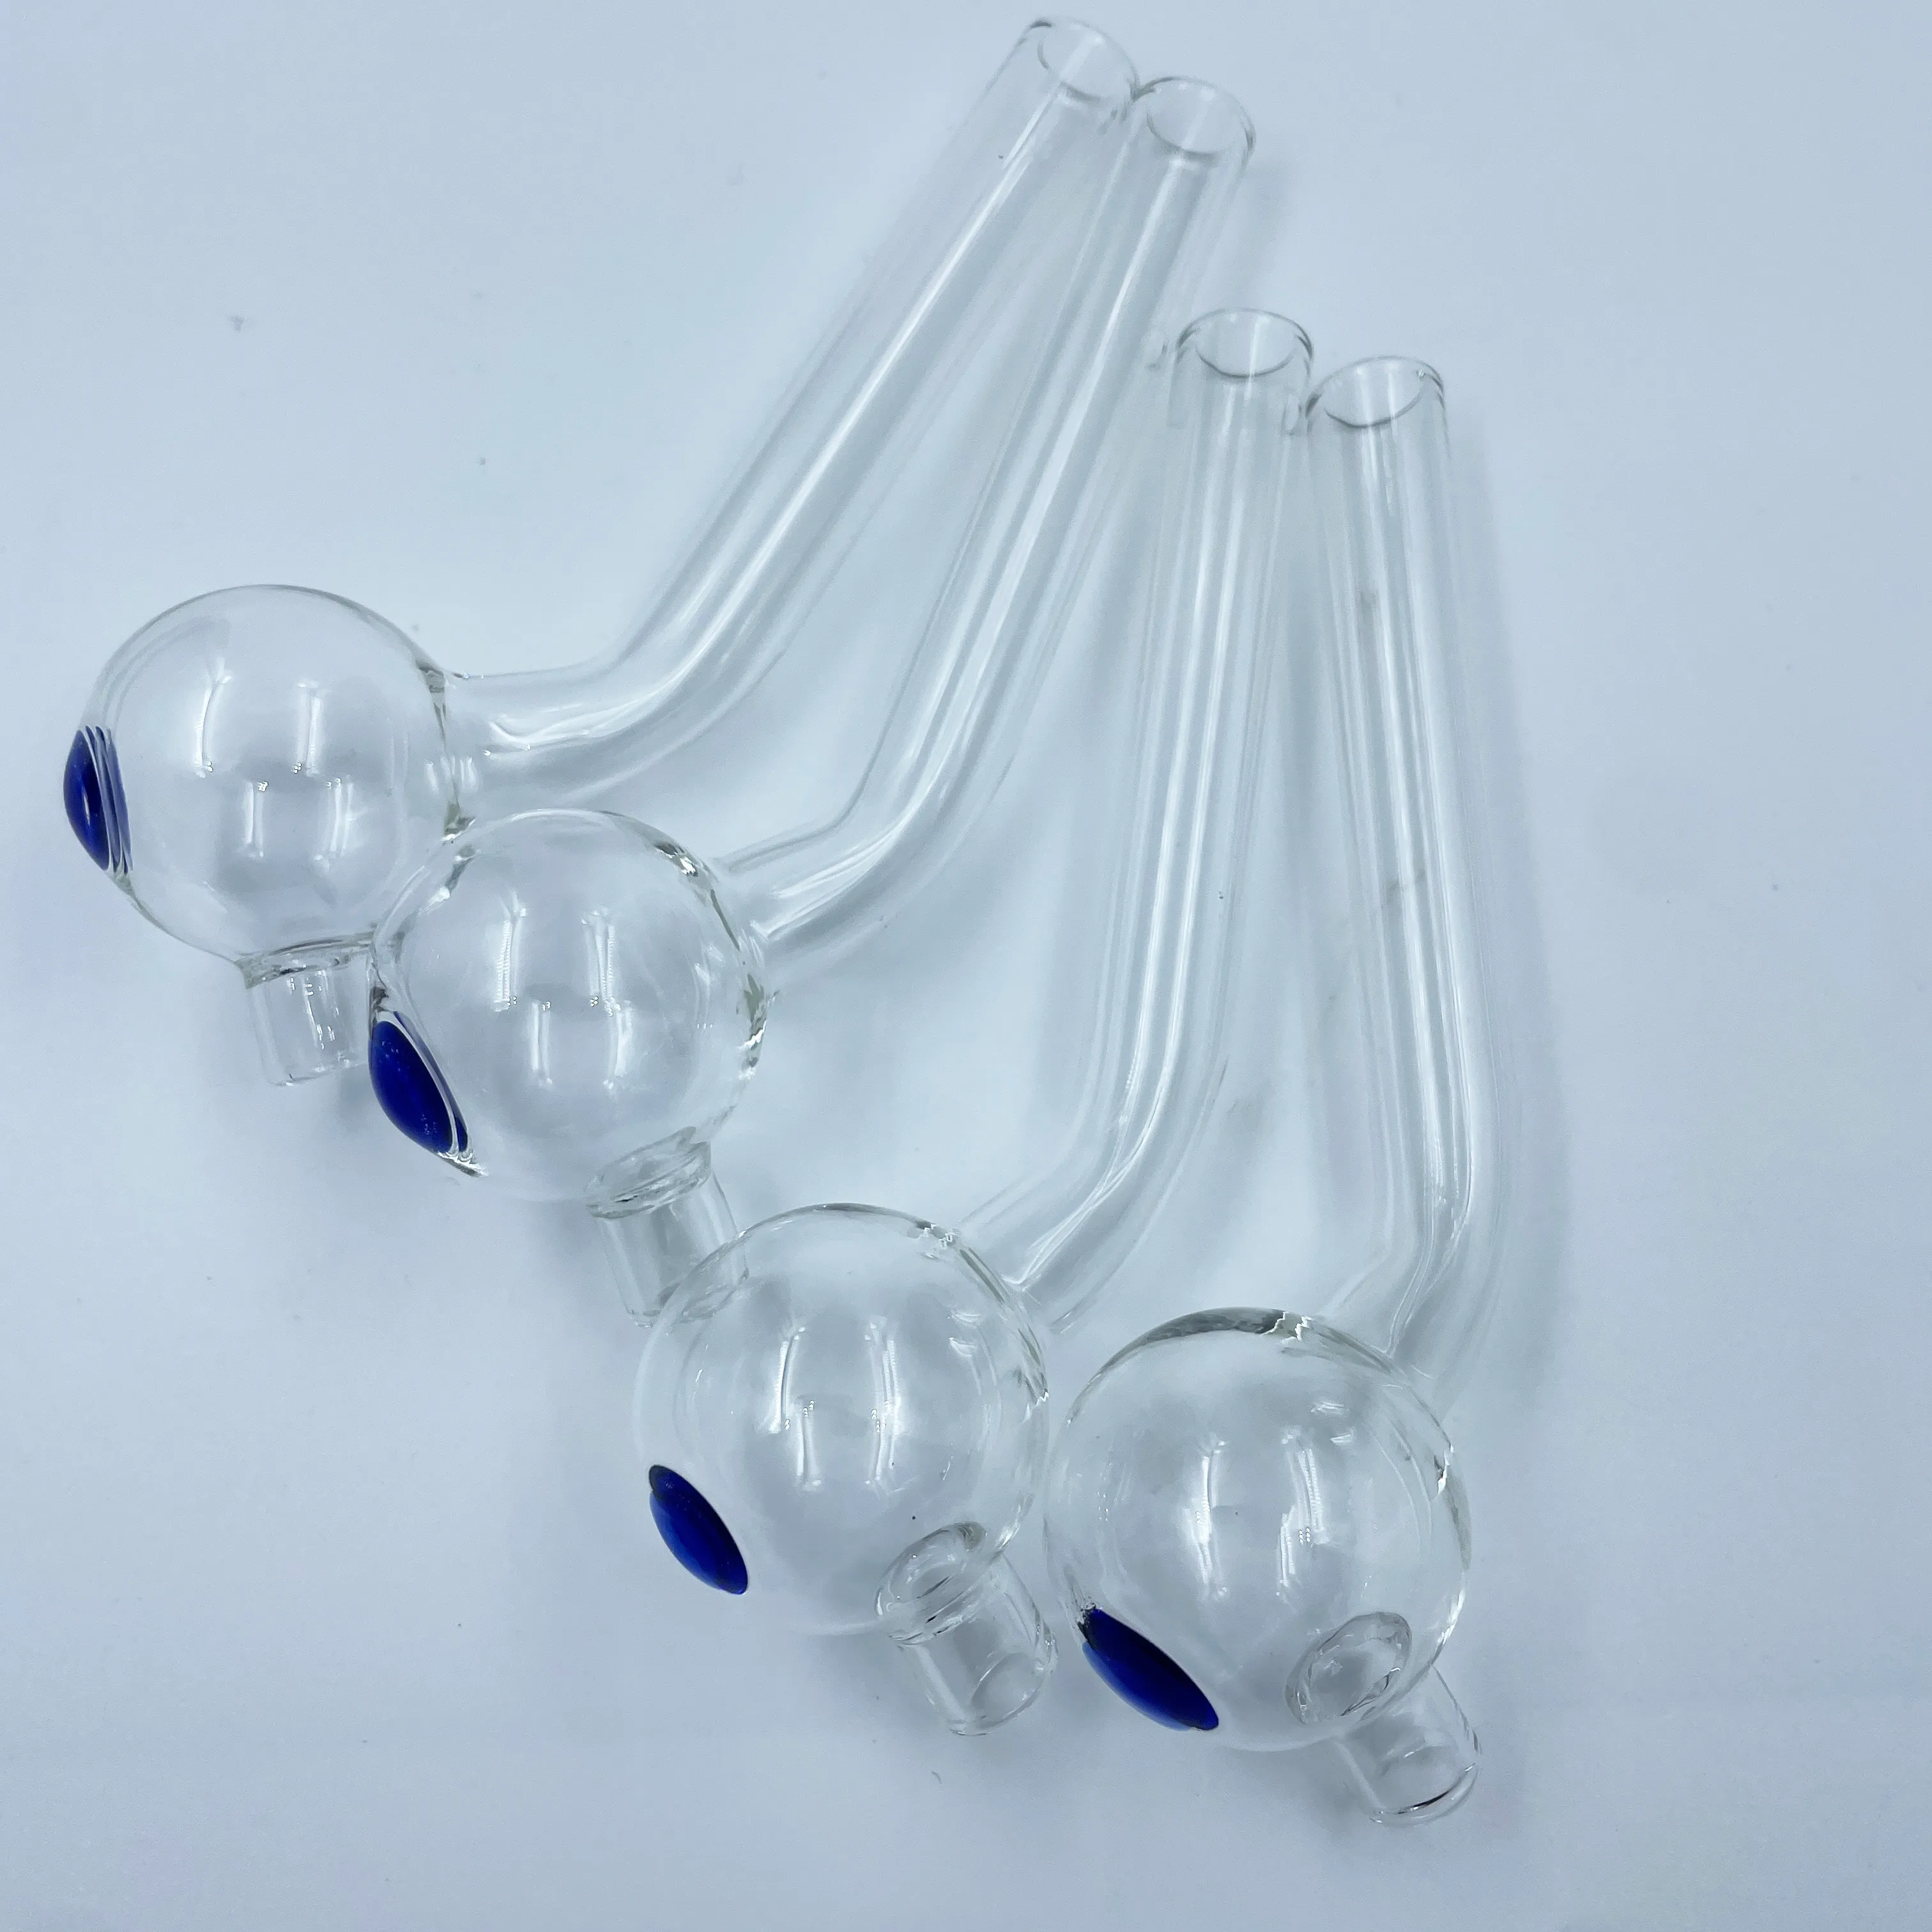 Oil Burner Glass Pipe 3cm Big Ball 4.7 inch length Smoking Pipes 12cm Transparent Pyrex Thick Clear Great Handcraft Hold Smoking Tubes for Smokers